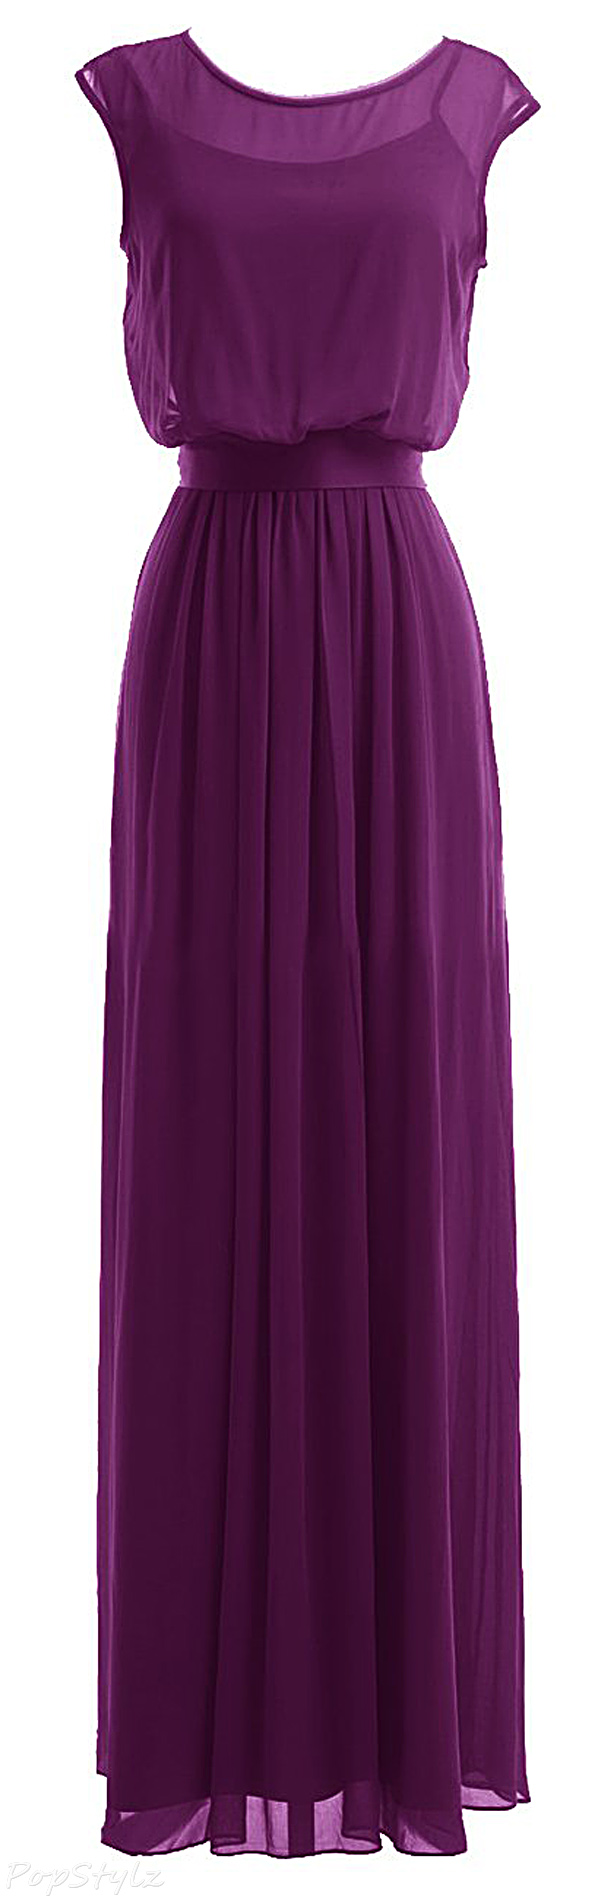 Diyouth Chiffon Scoop Neck Long Evening Gown